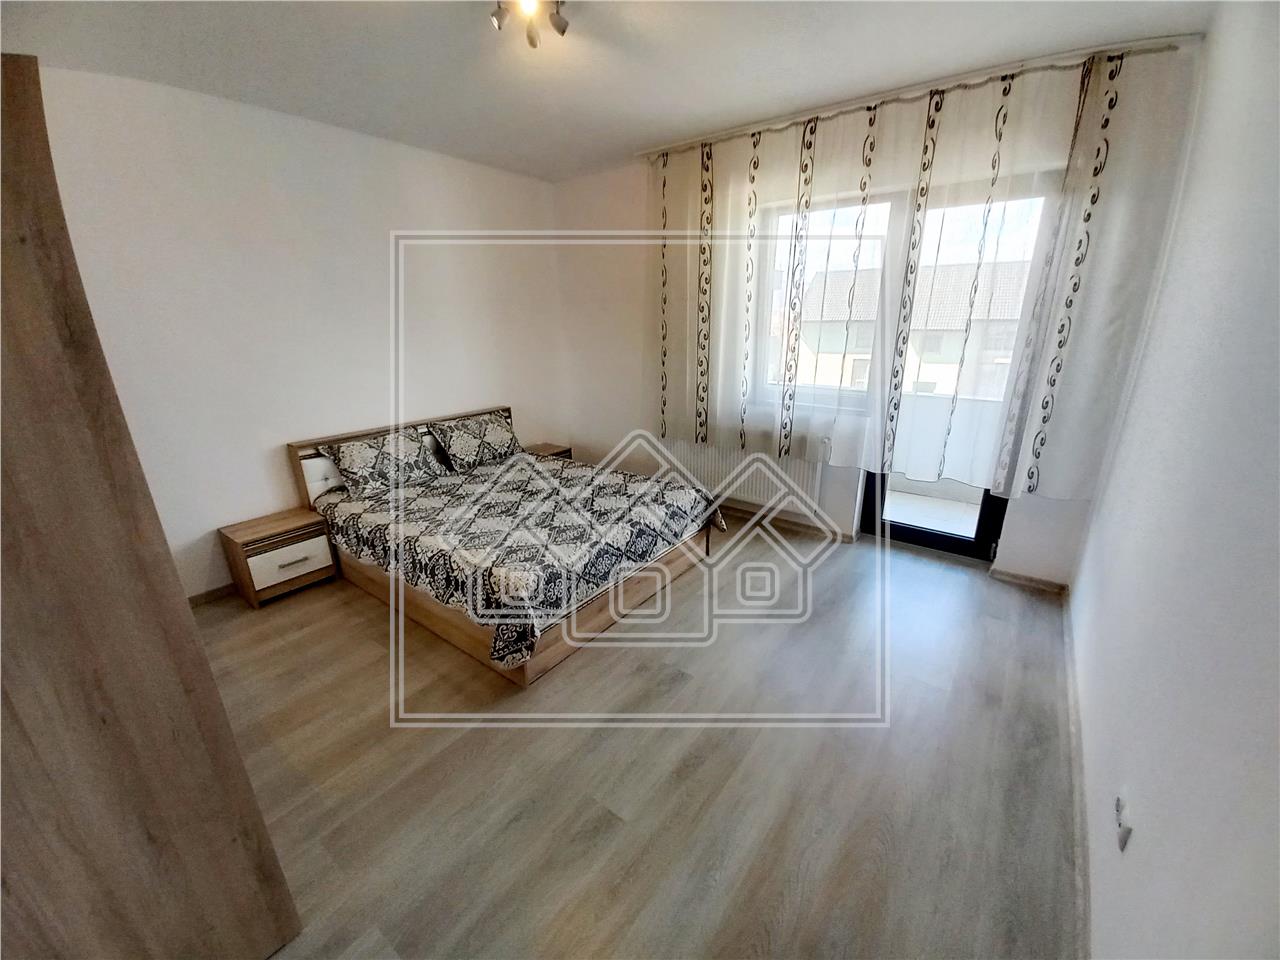 Apartment for rent in Alba Iulia - 2 rooms - parking space - for first